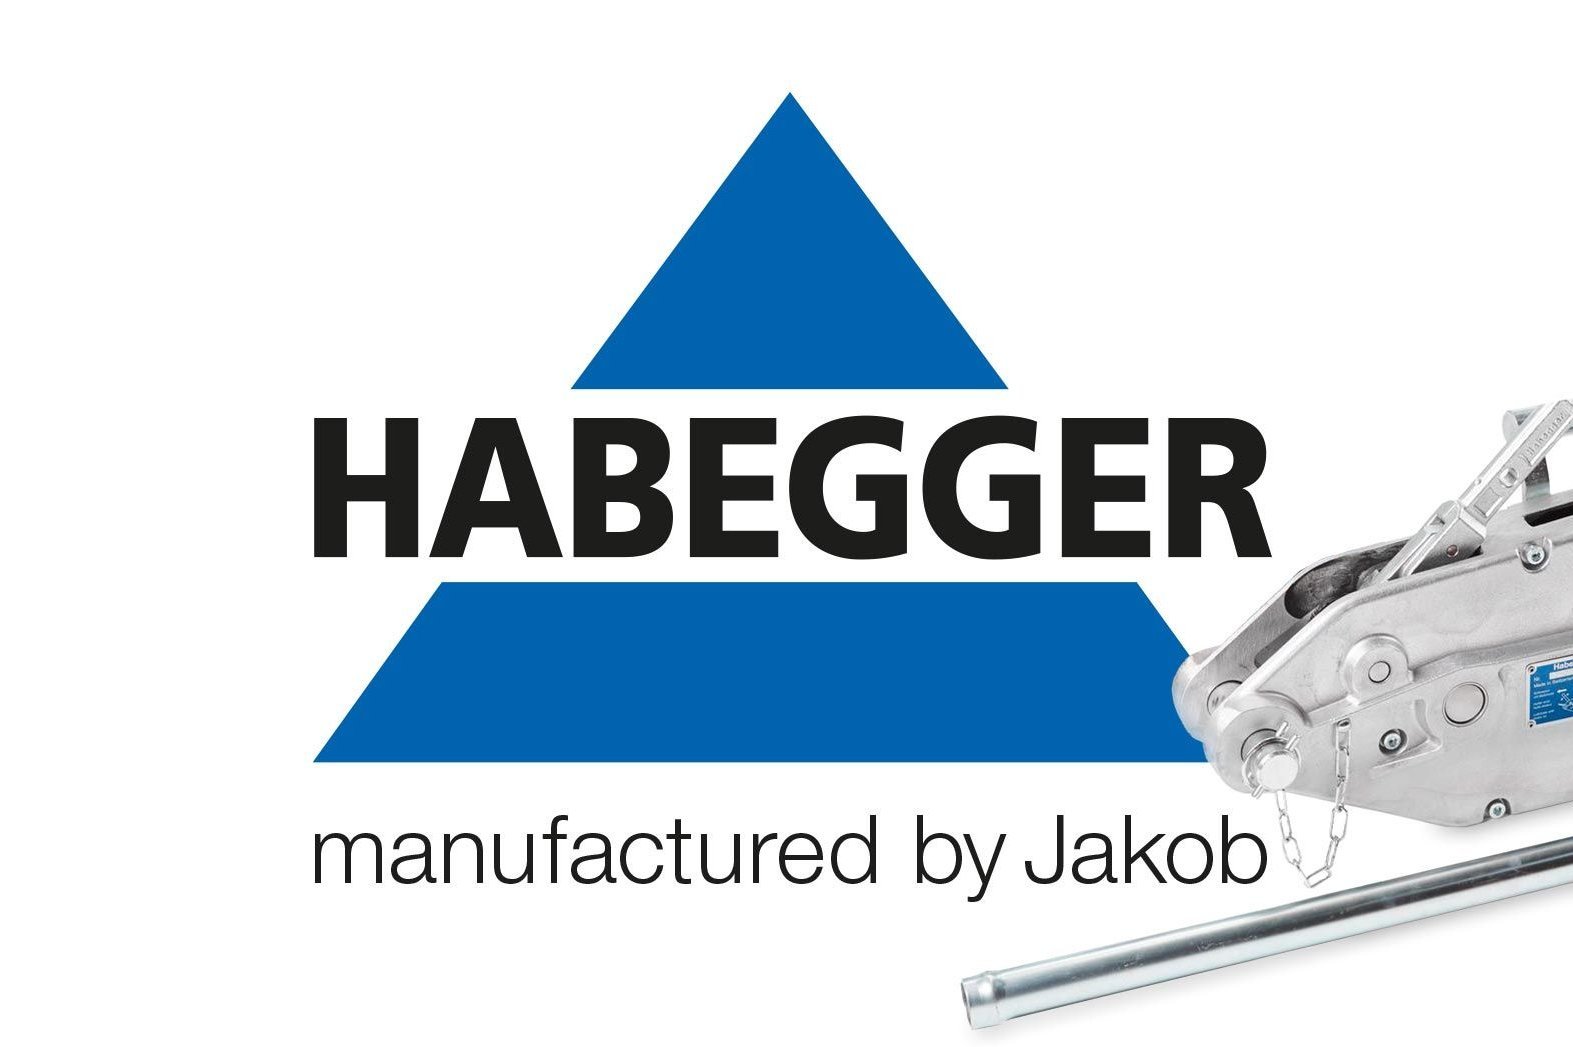 The new Habegger logo with the claim 'manufactured by Jakob' and a Habegger multi-purpose hoist